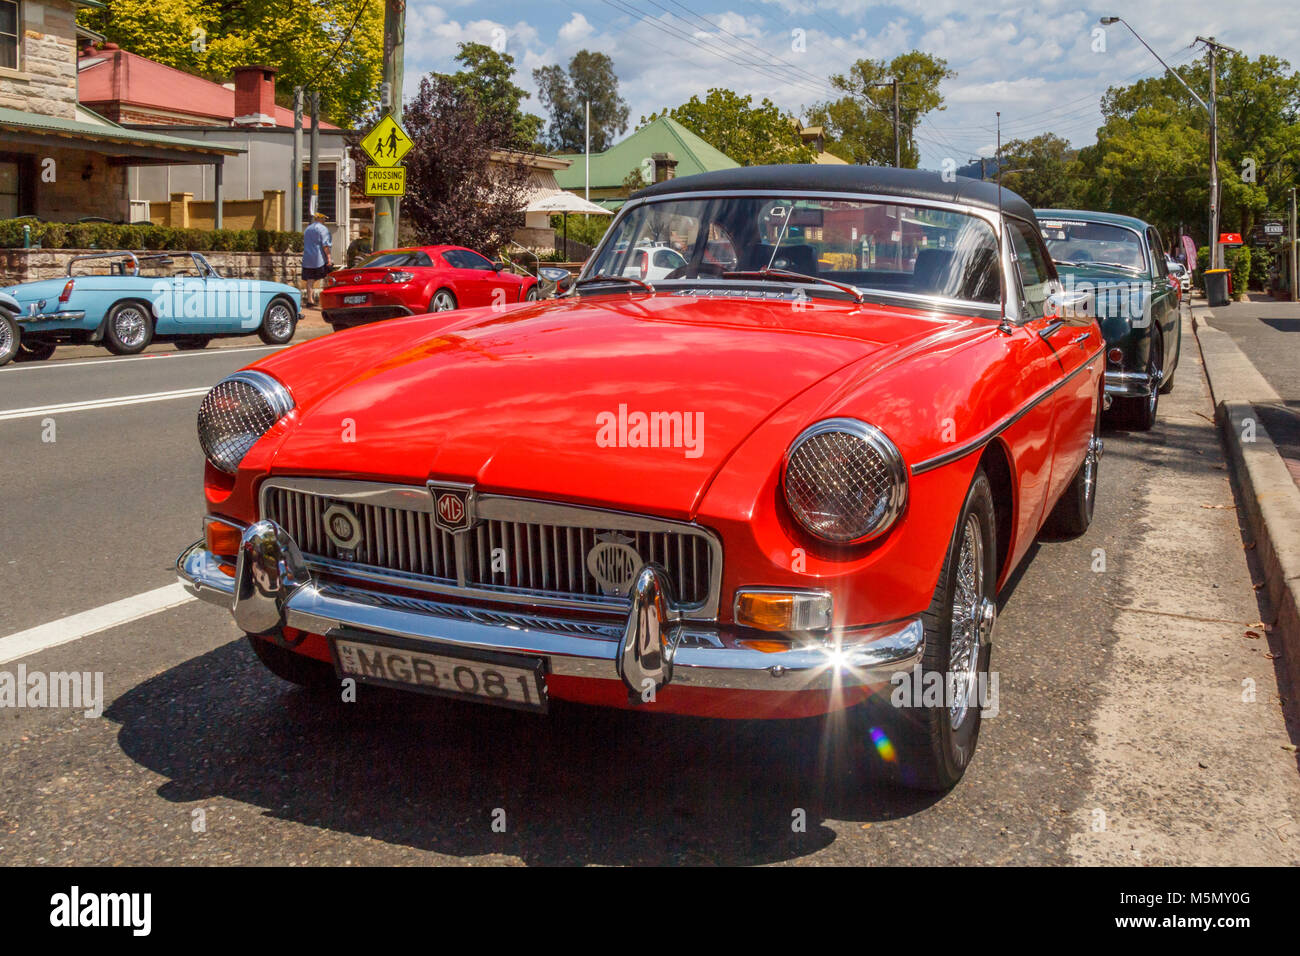 Classic red MGB roadster voiture de sport, Kangaroo Valley, New South Wales, Australia Banque D'Images